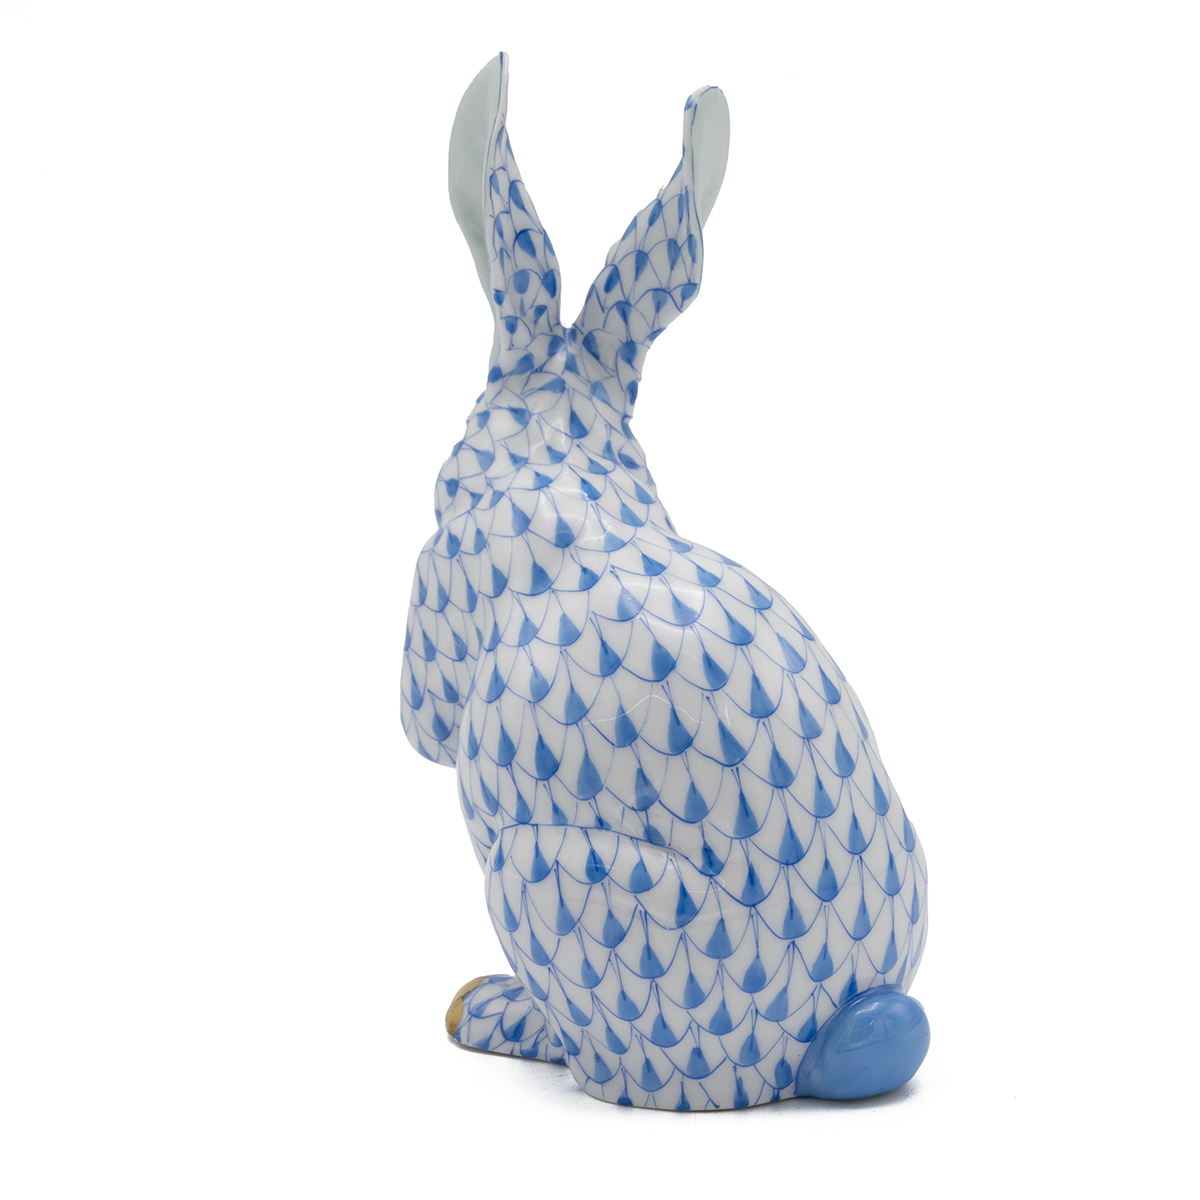 Herend VHB (Vieux Herend Blue) Fishnet figurine model number 15307 - Medium Rabbit Paws Up. Heigh... - Image 2 of 3